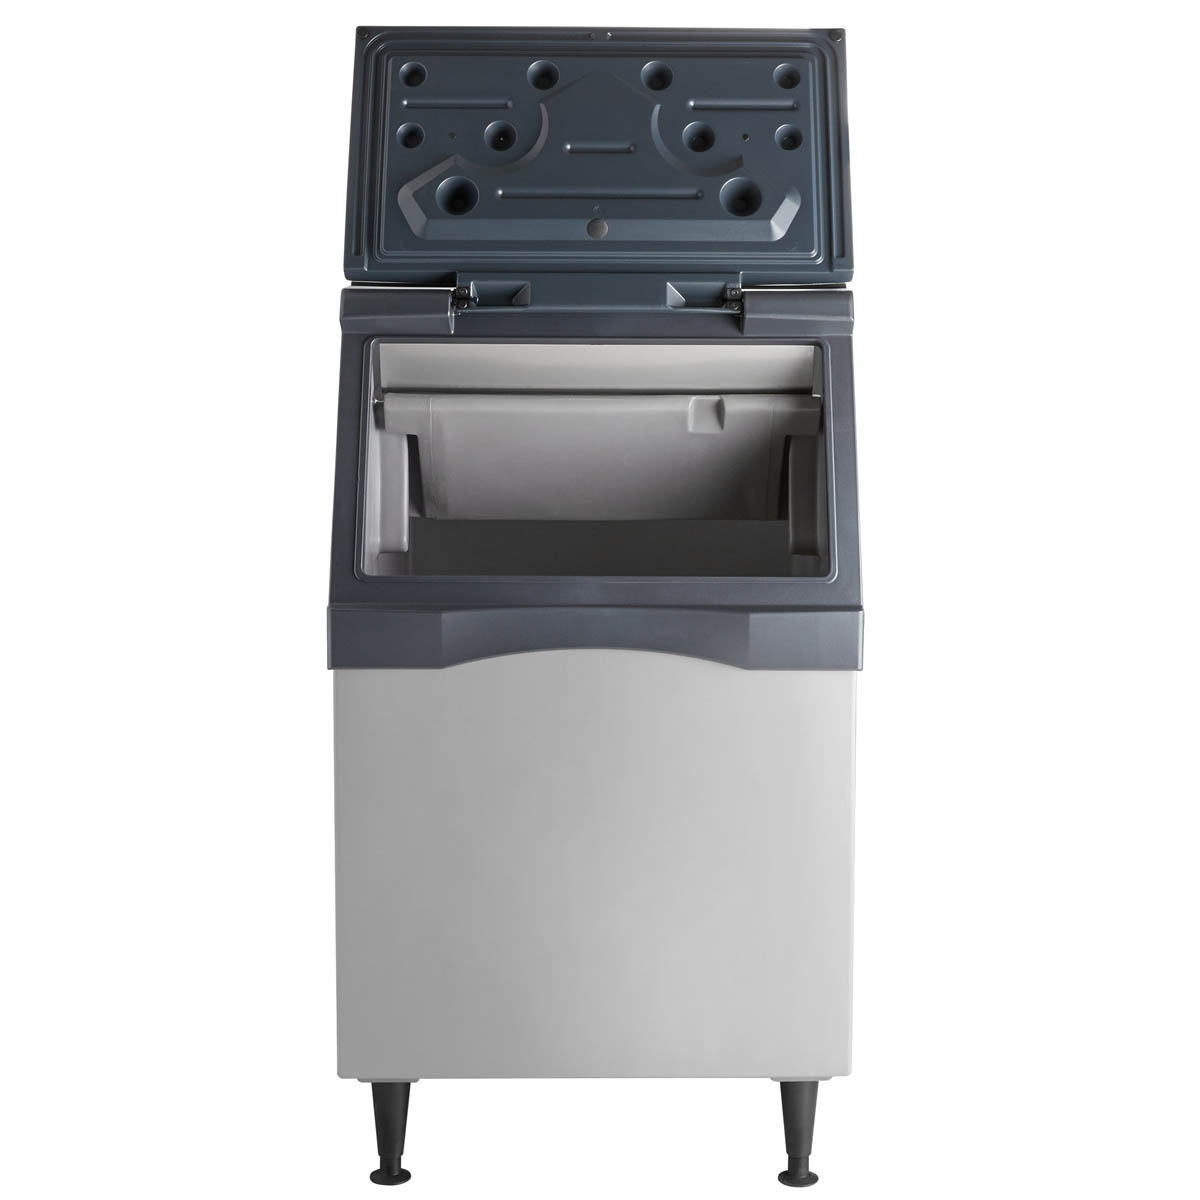 Scotsman B530P Is An Effective Way To Keep Your Ice Supply Cool and Available, Chef's Deal